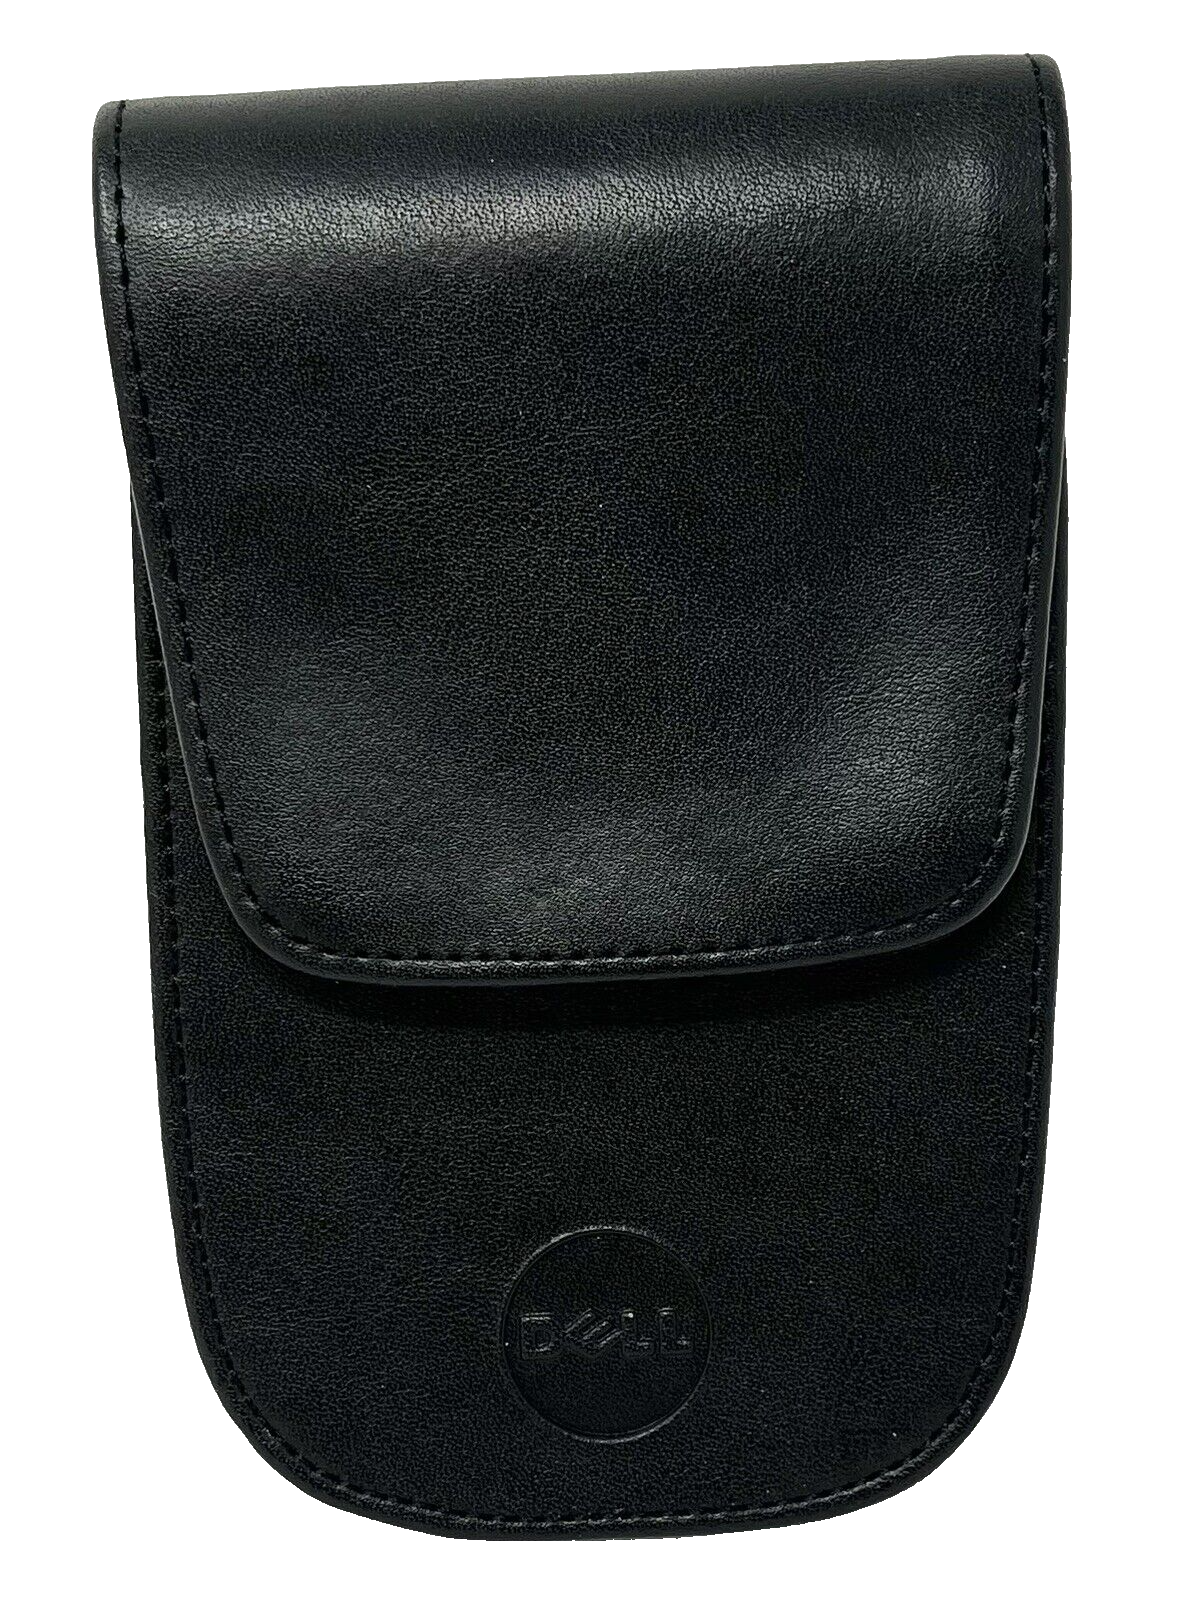 Primary image for DELL Calculator/Phone Leather Belt Pouch Clip Black